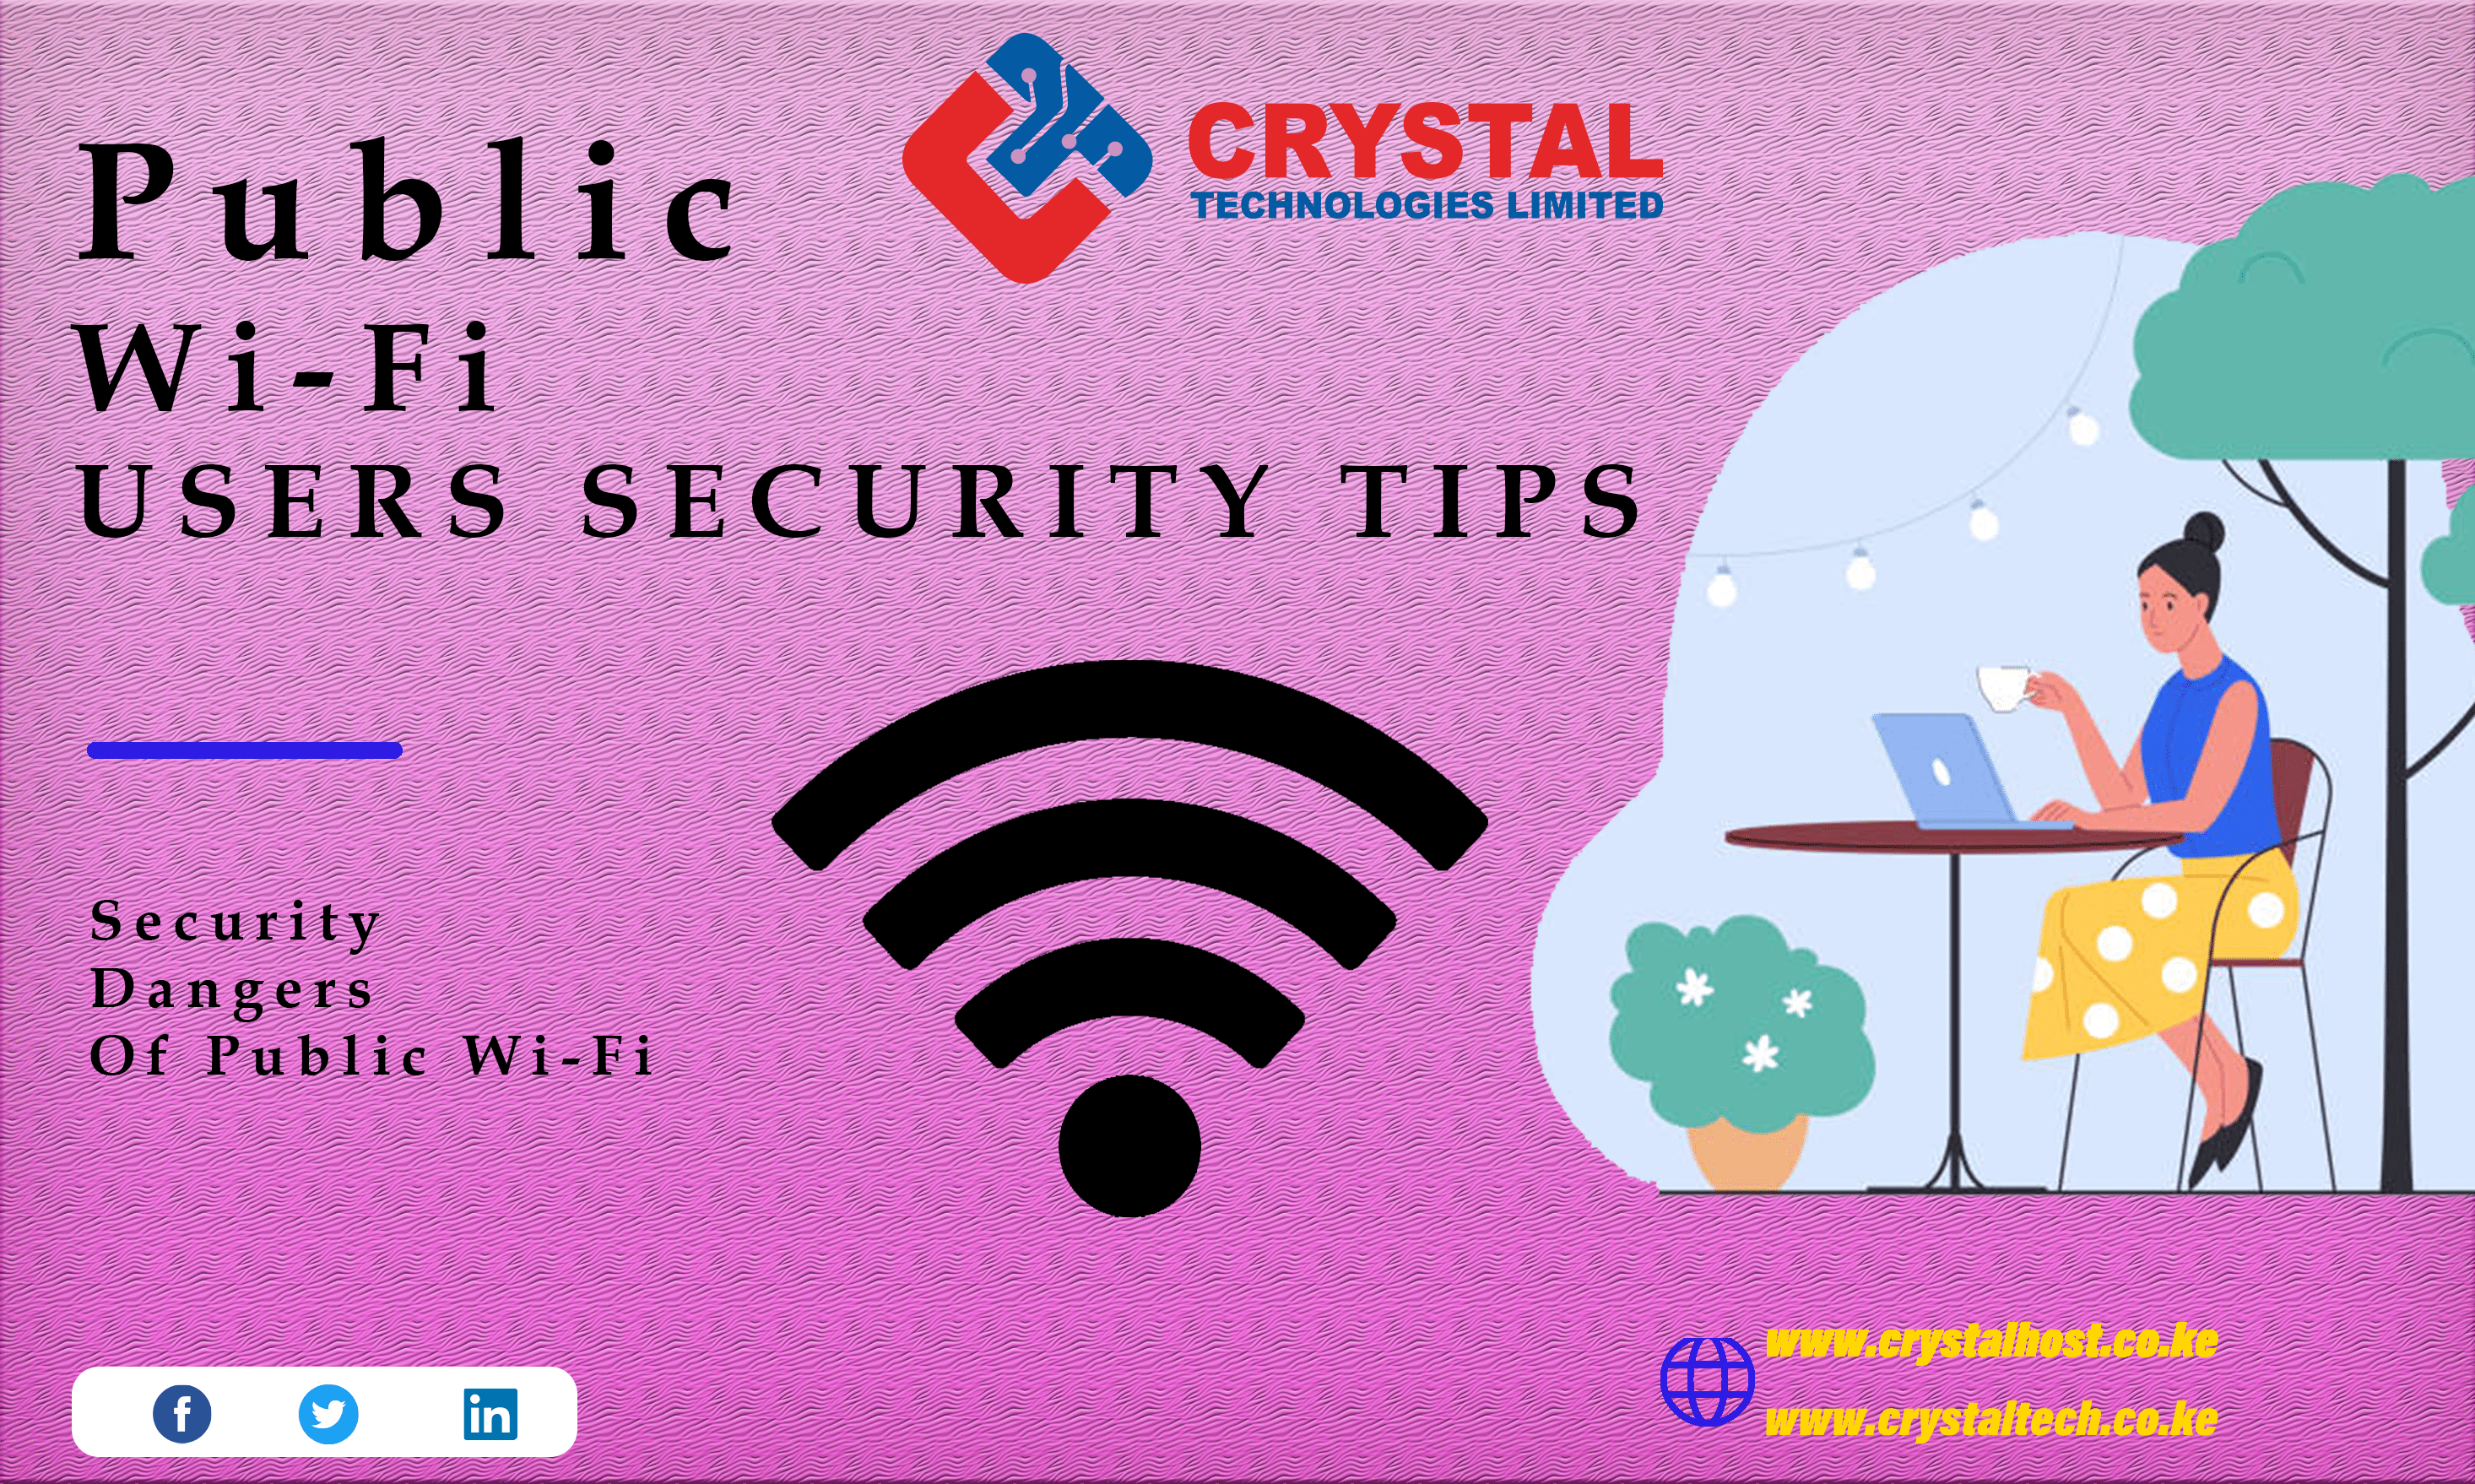 security tips for public Wi-Fi users